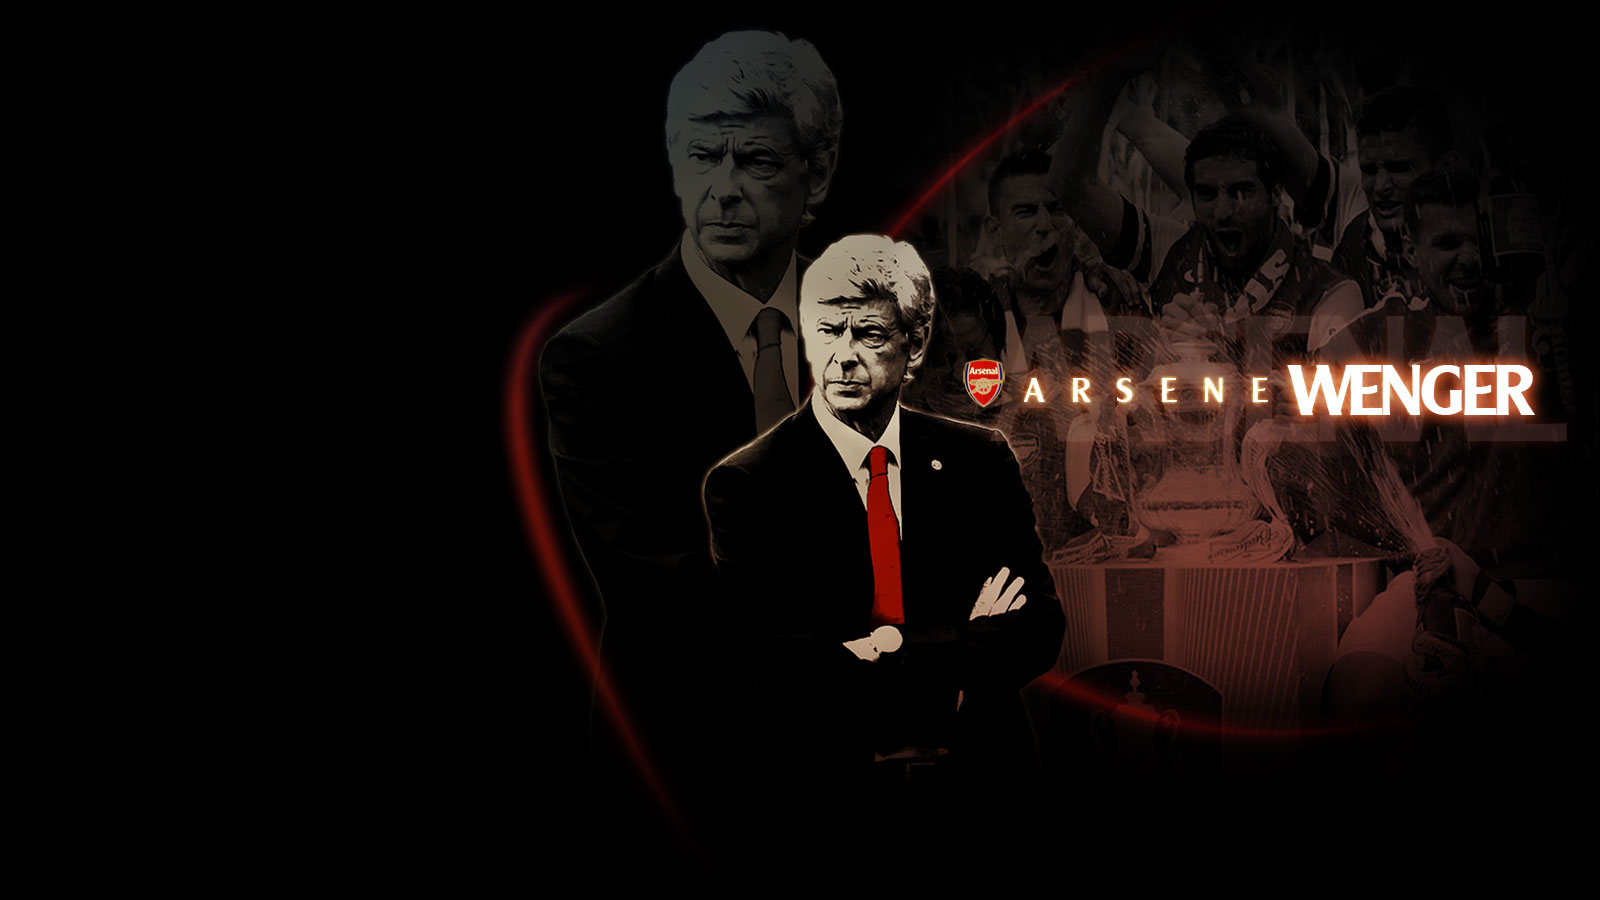 Arsene Wenger Wallpapers HD Arsenal Coach and Manager ...